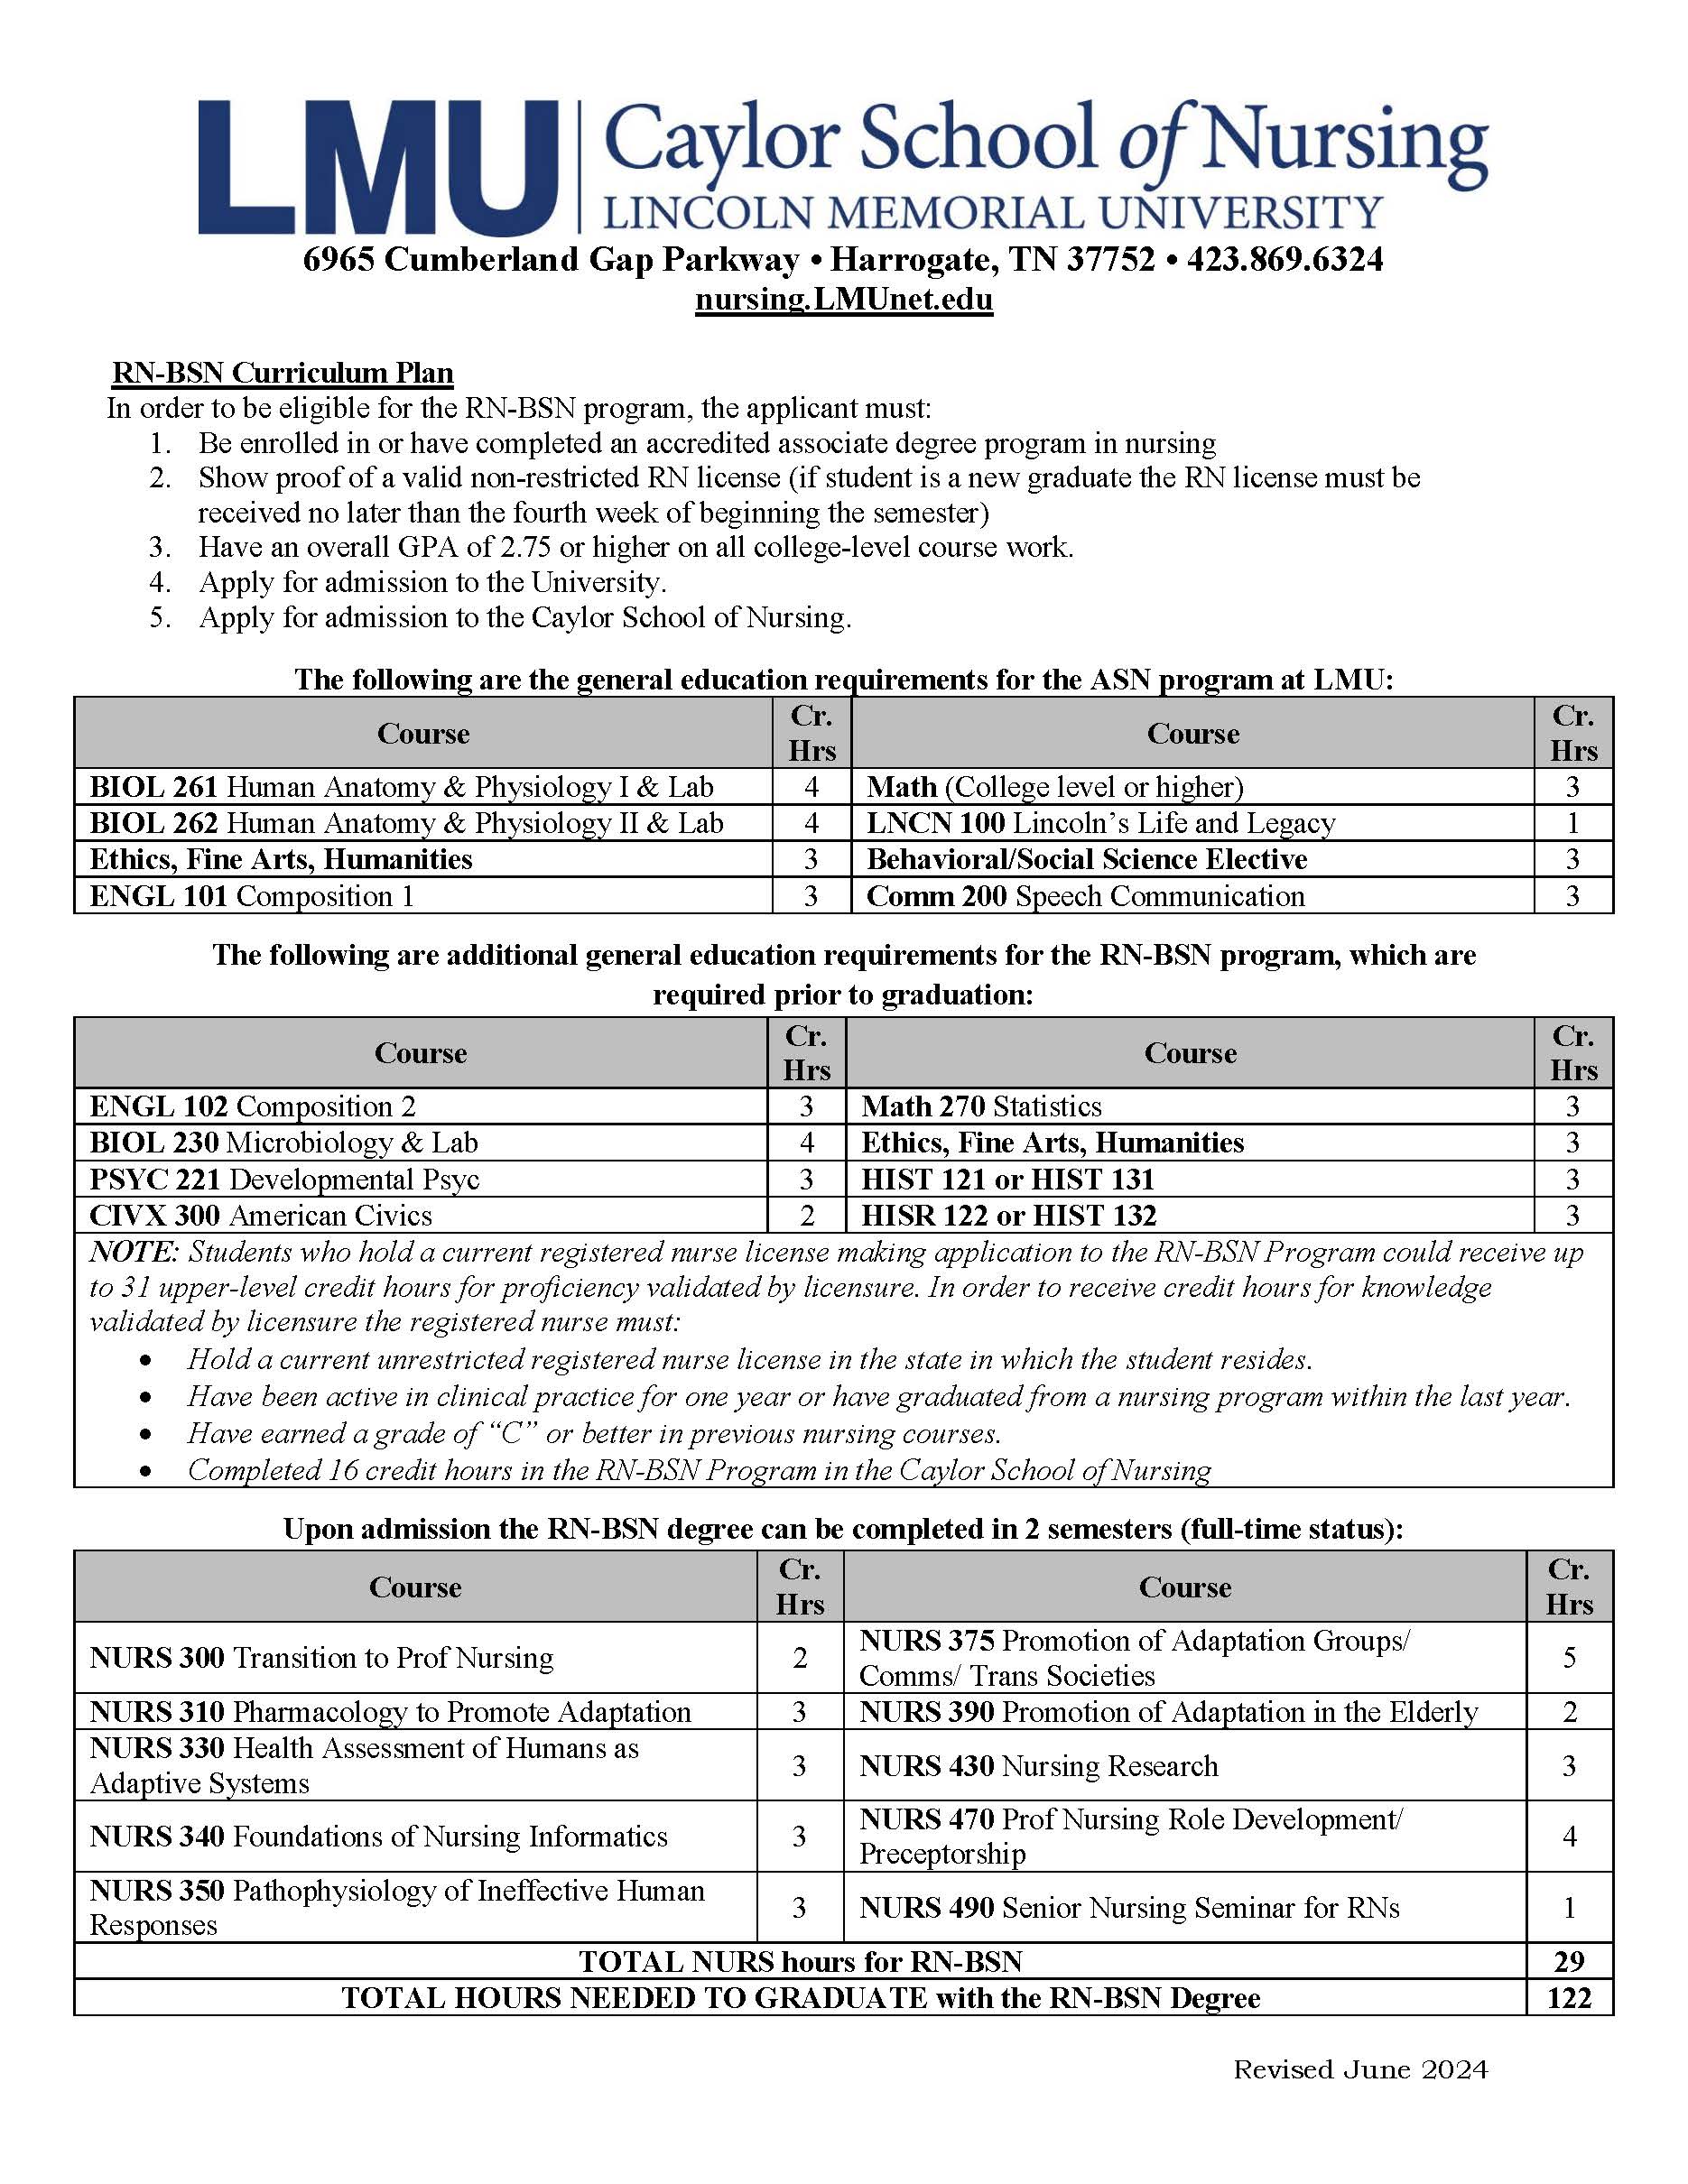 RN-BSN course table